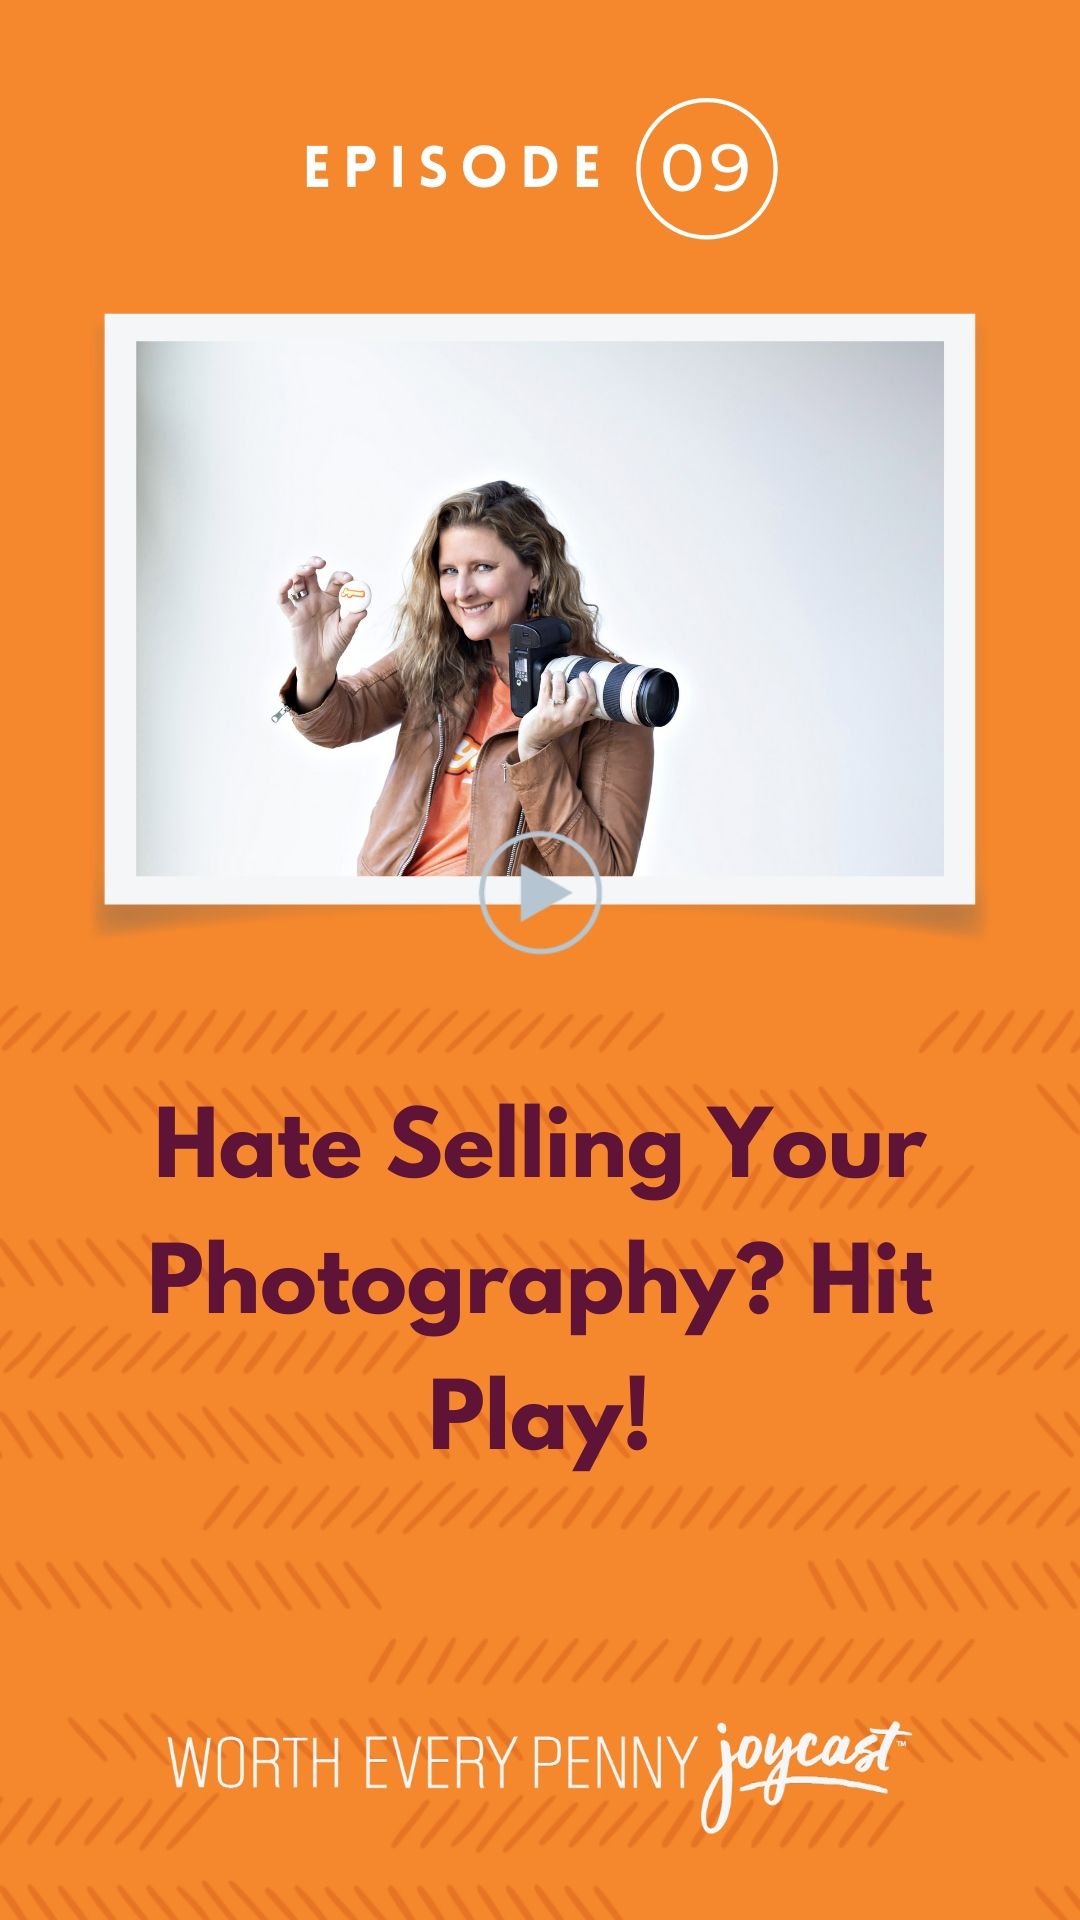 Episode 9: Hate Selling Your Photography? Hit Play!